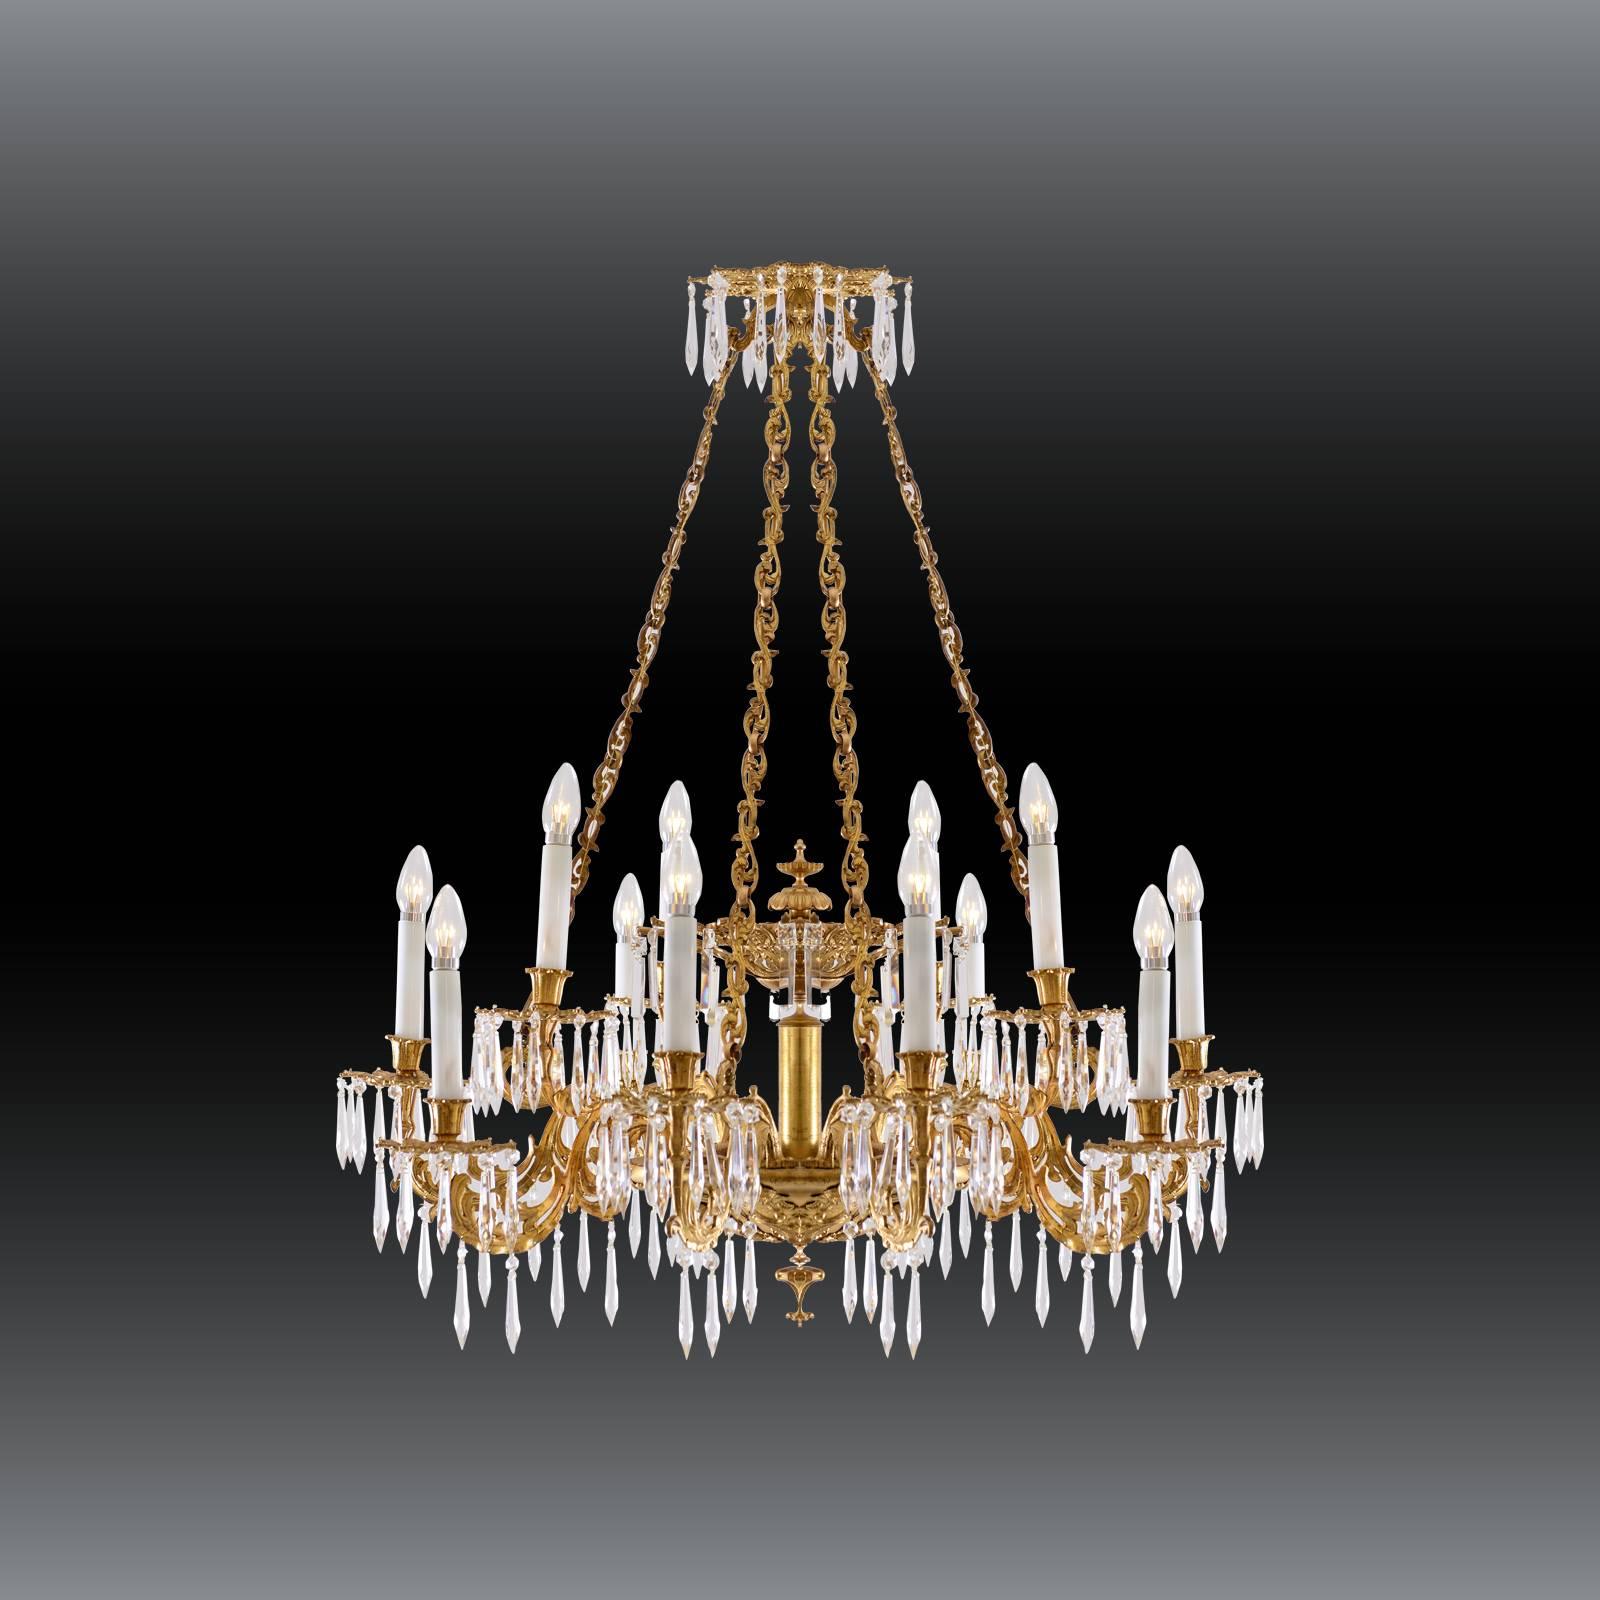 Richly decorated chandelier from the so called Ringstrassen, period in Vienna. Casted brass-parts, hand-cut crystal hangings.